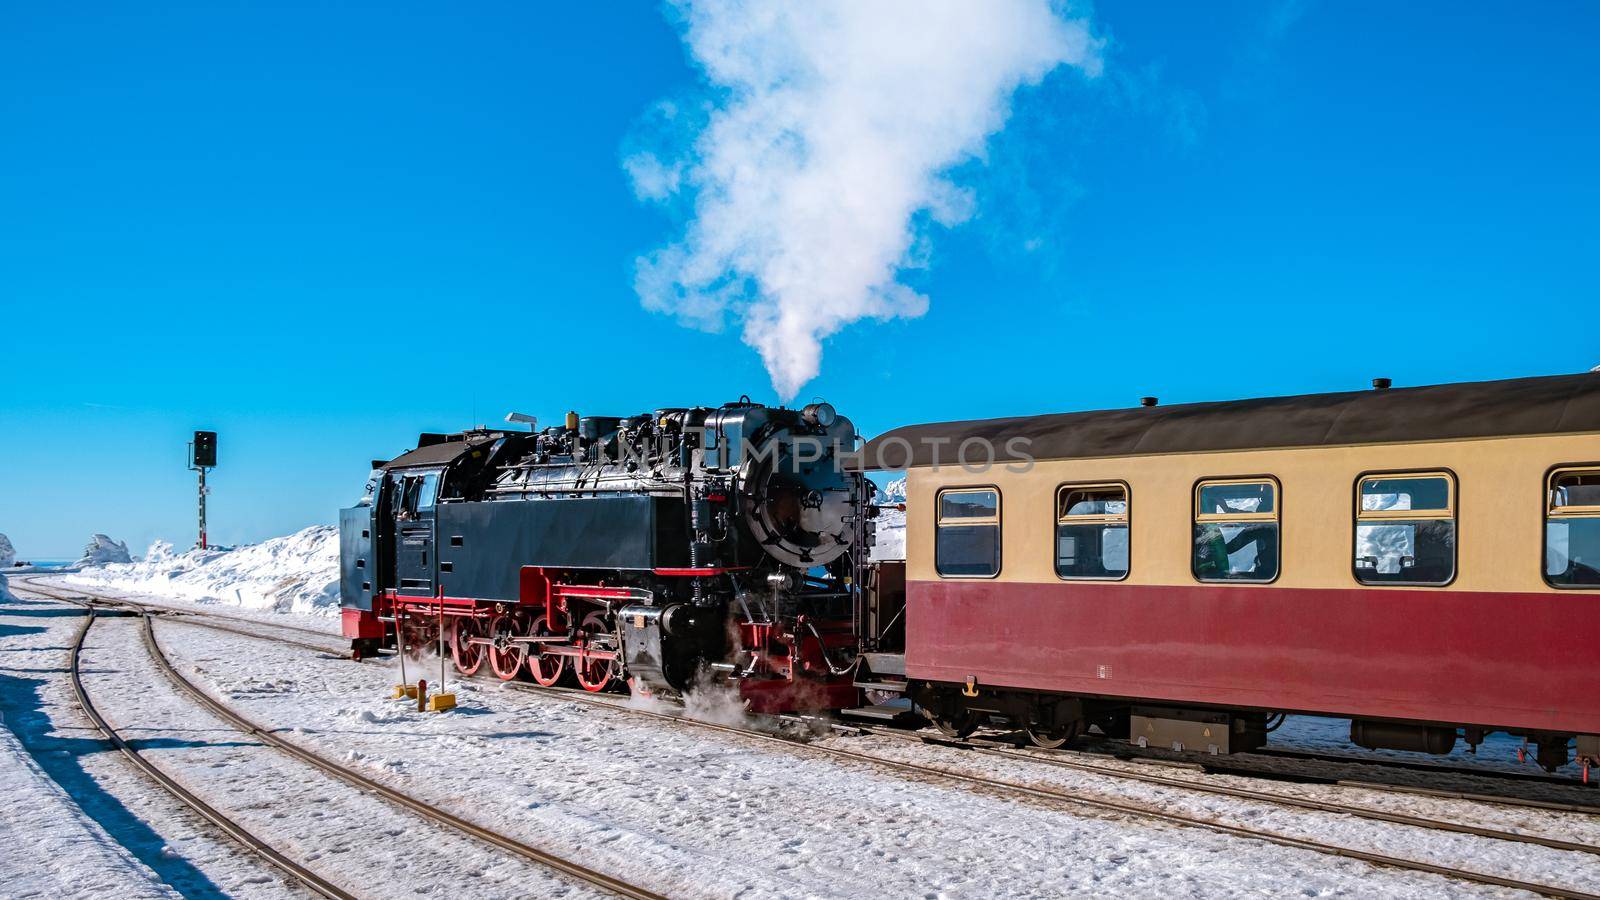 Harz national park Germany, Steam train on the way to Brocken through the winter landscape, Famous steam train through the winter mountain. Brocken, Harz National Park Mountains in Germany Europe